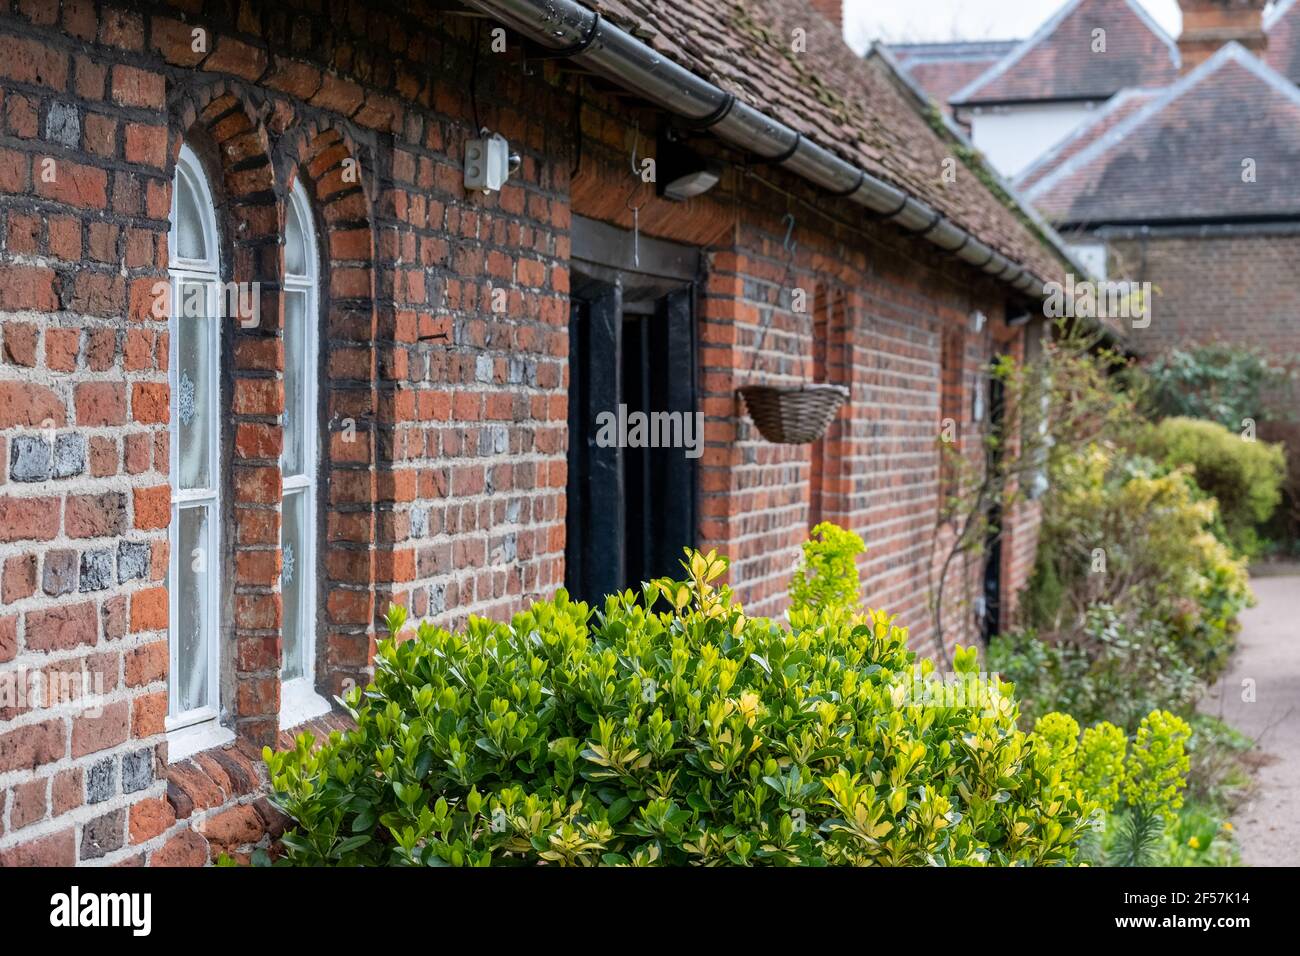 Wilbraham's Almshouses in Hadley Green, High Barnet, North London UK. Cottages are built of red brick and red roof tiles, have mullioned windows and p Stock Photo